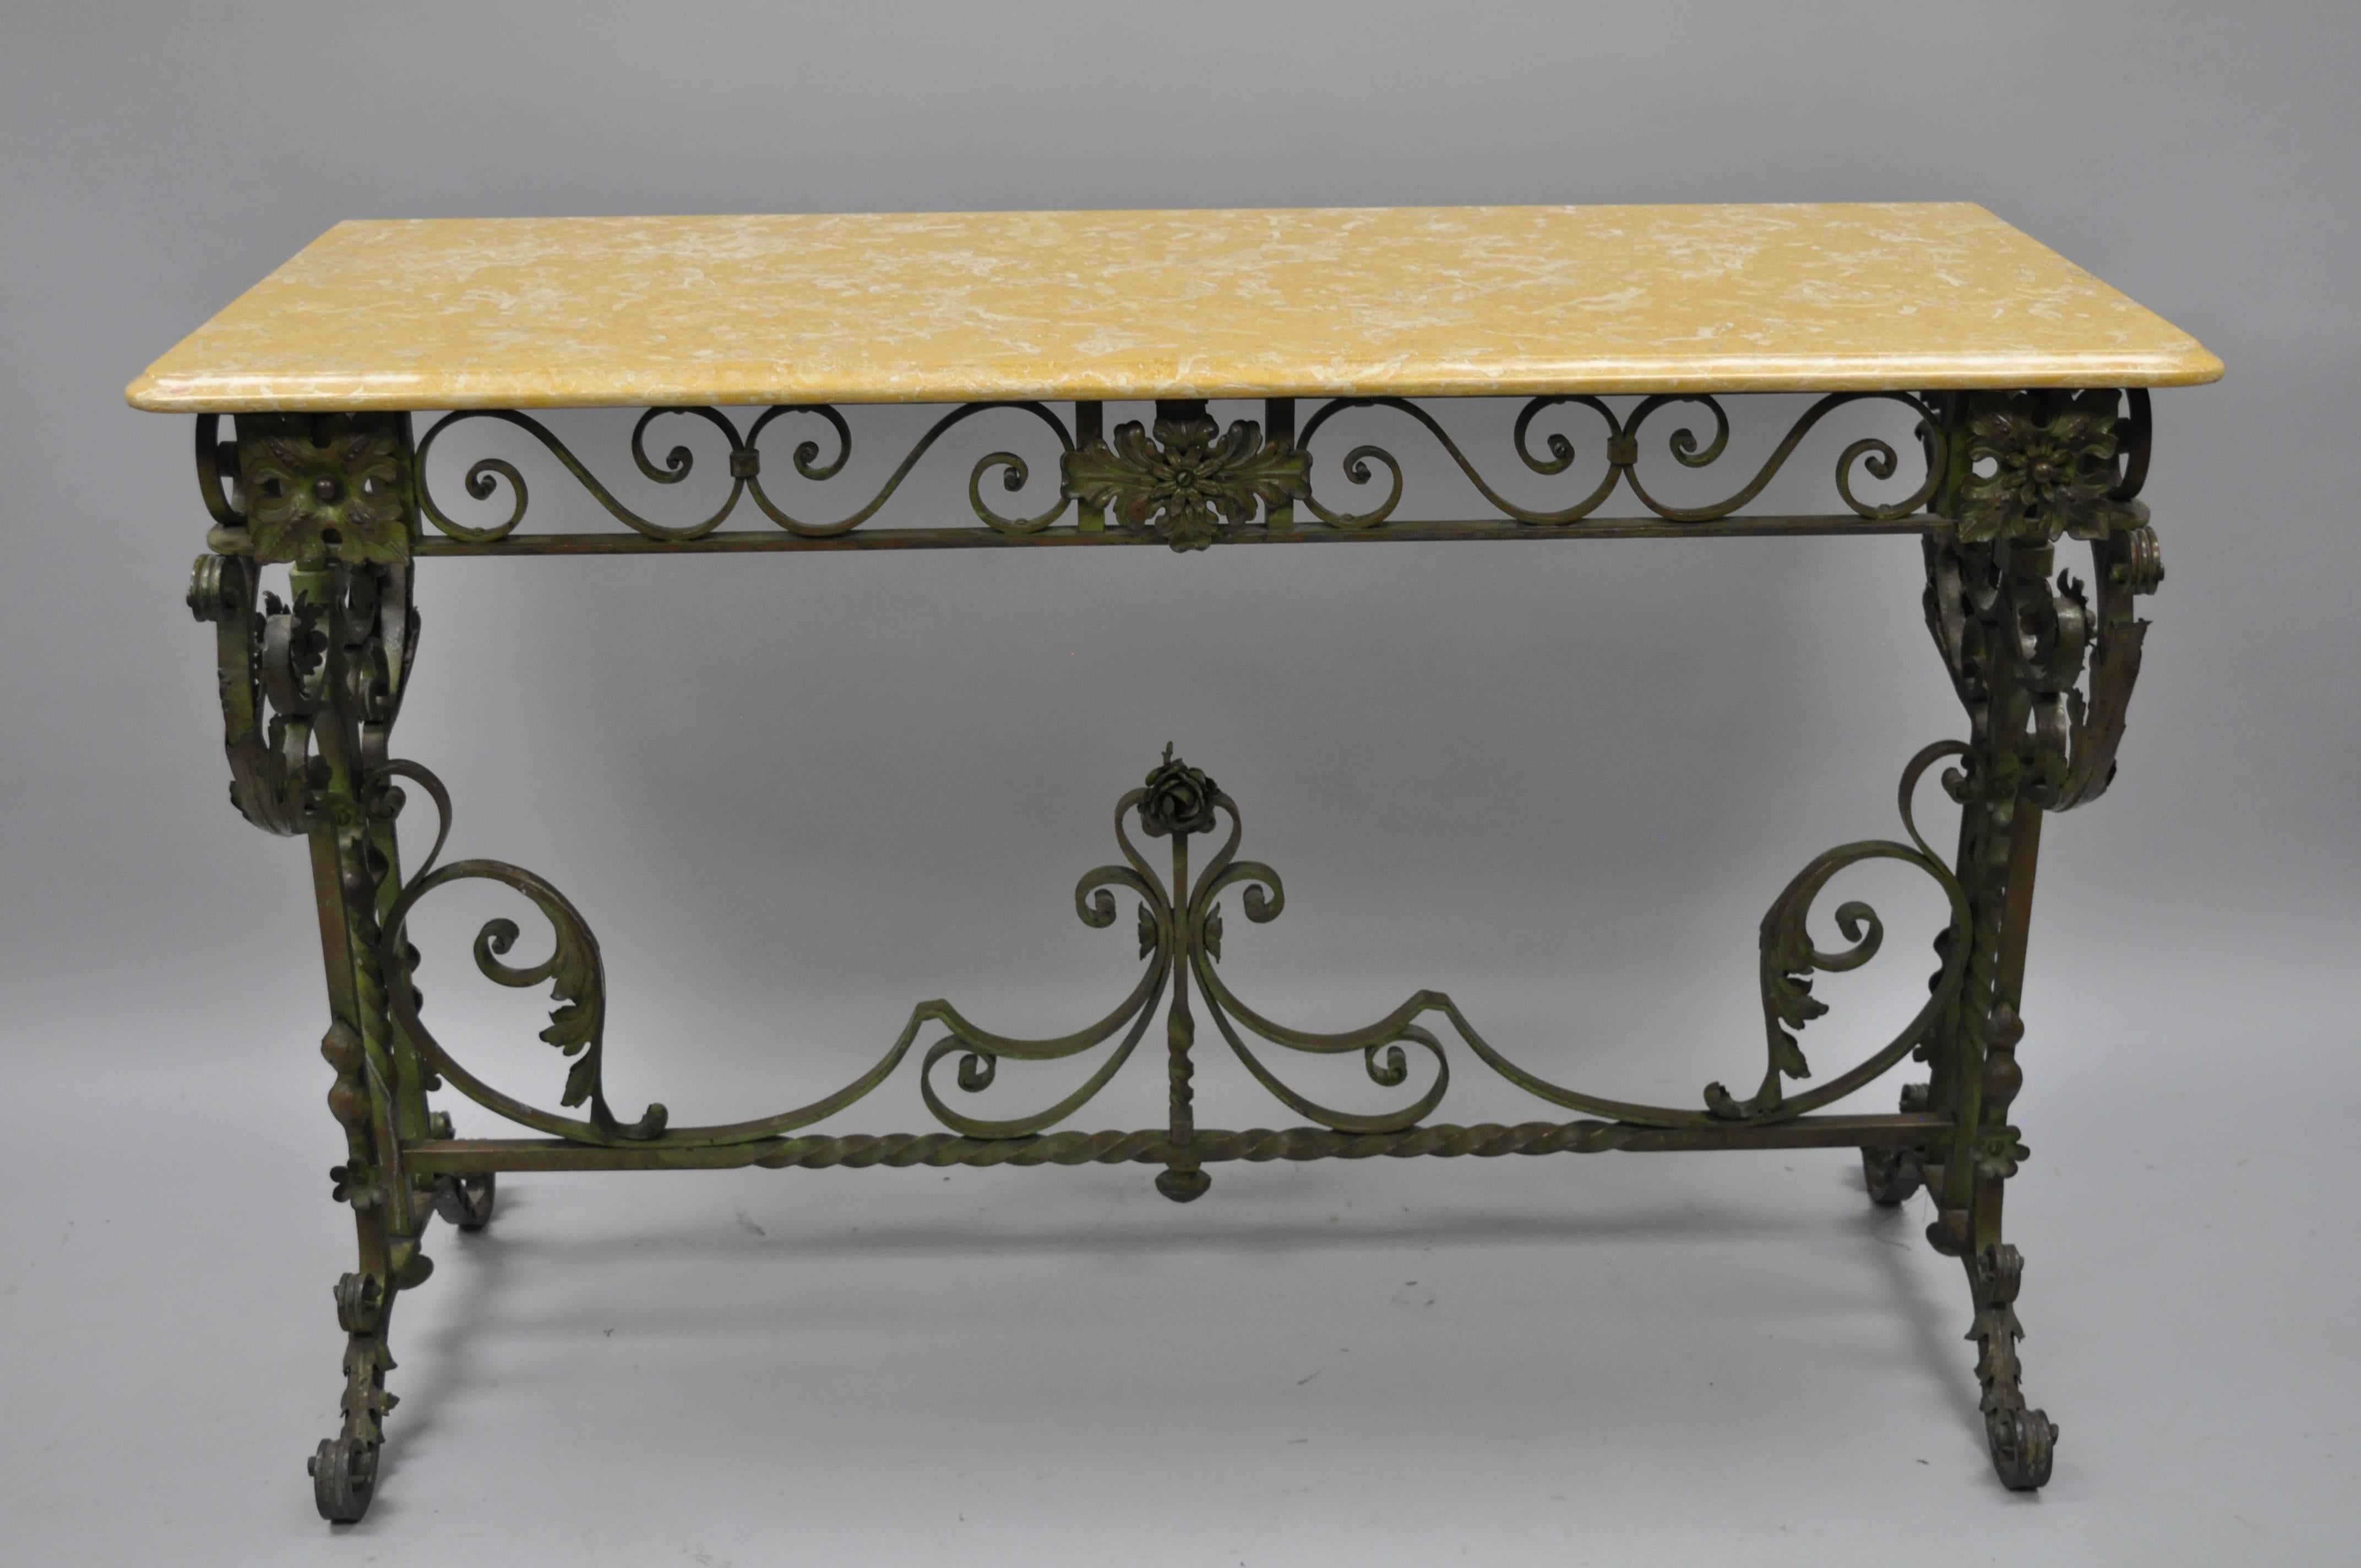 Antique French Art Nouveau scrolling wrought iron marble-top console table. Item features a patinated green scrolling wrought iron base with ornate floral work and stretcher support. The yellowish tan marble top features a beveled edge and rounded